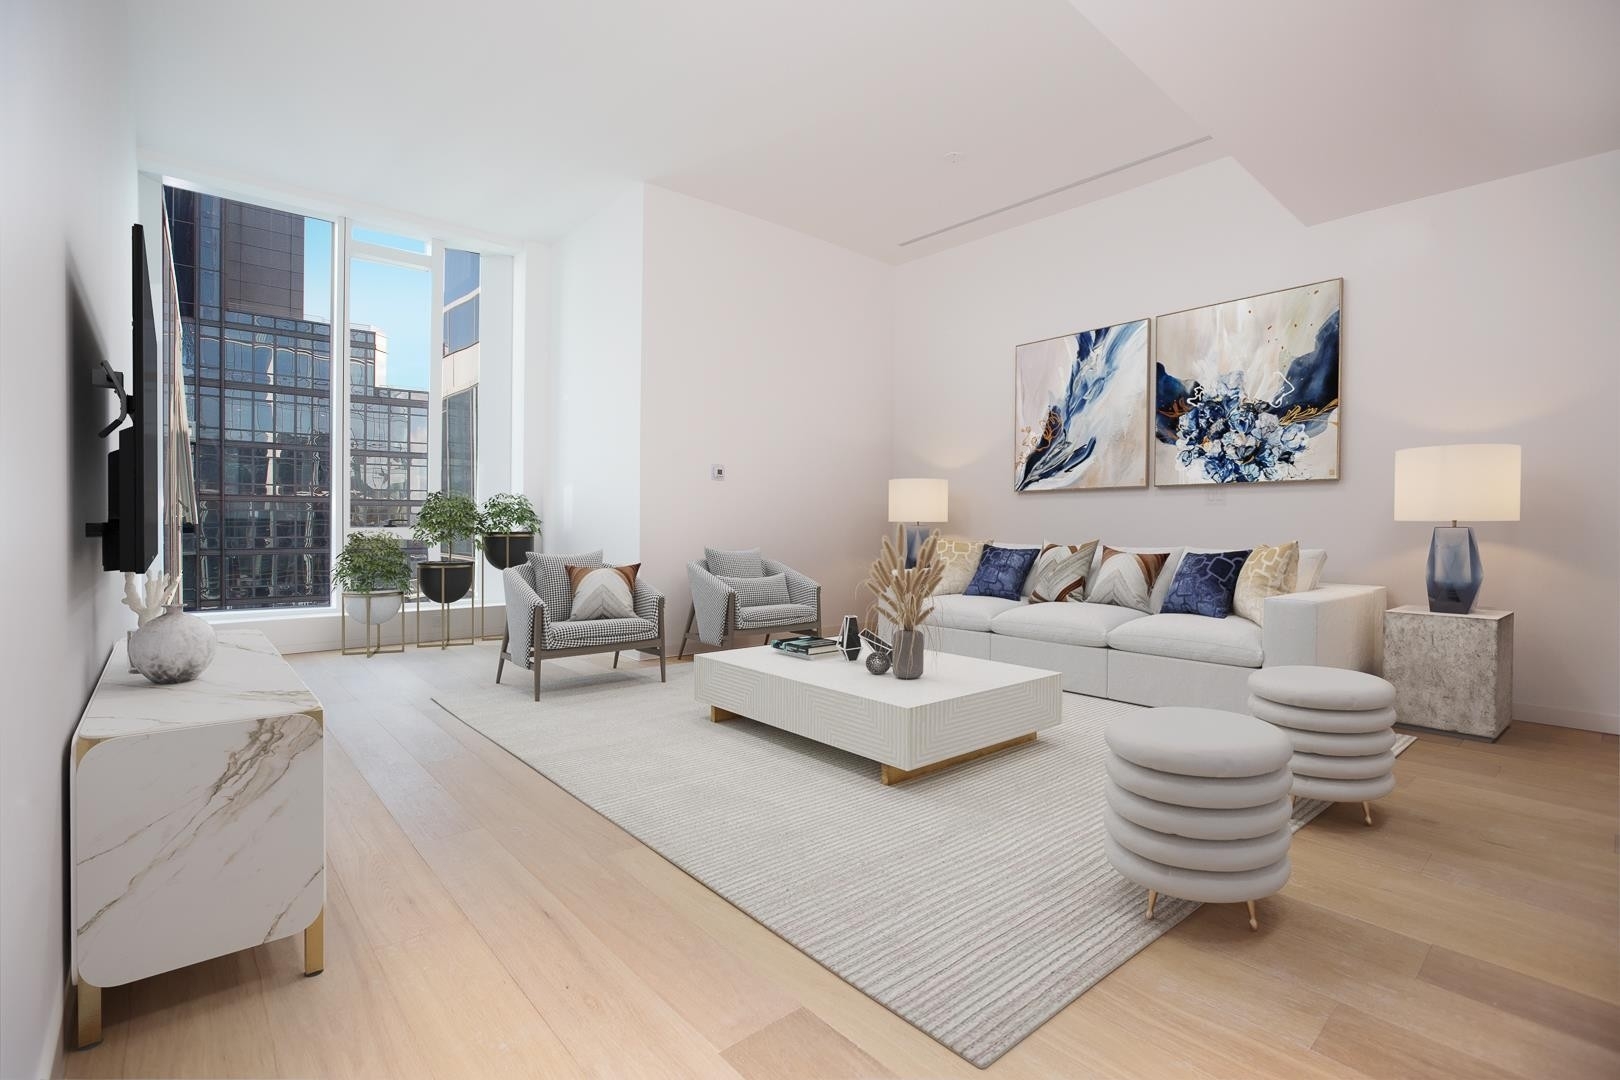 Property at Lincoln Square, New York, New York 10023